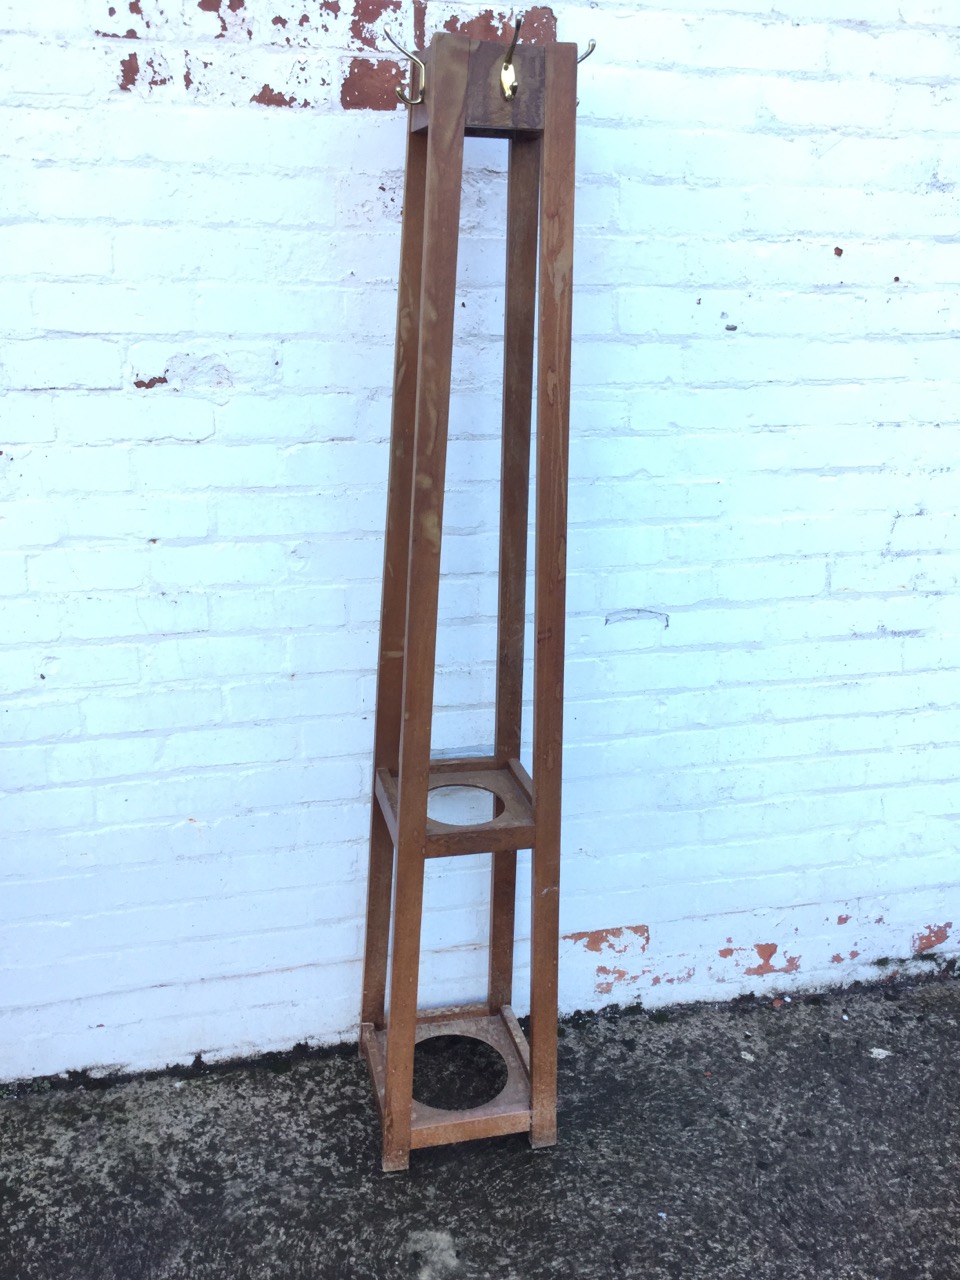 A square mahogany hatstand mounted with pegs, having angled rectangular legs joined by two platforms